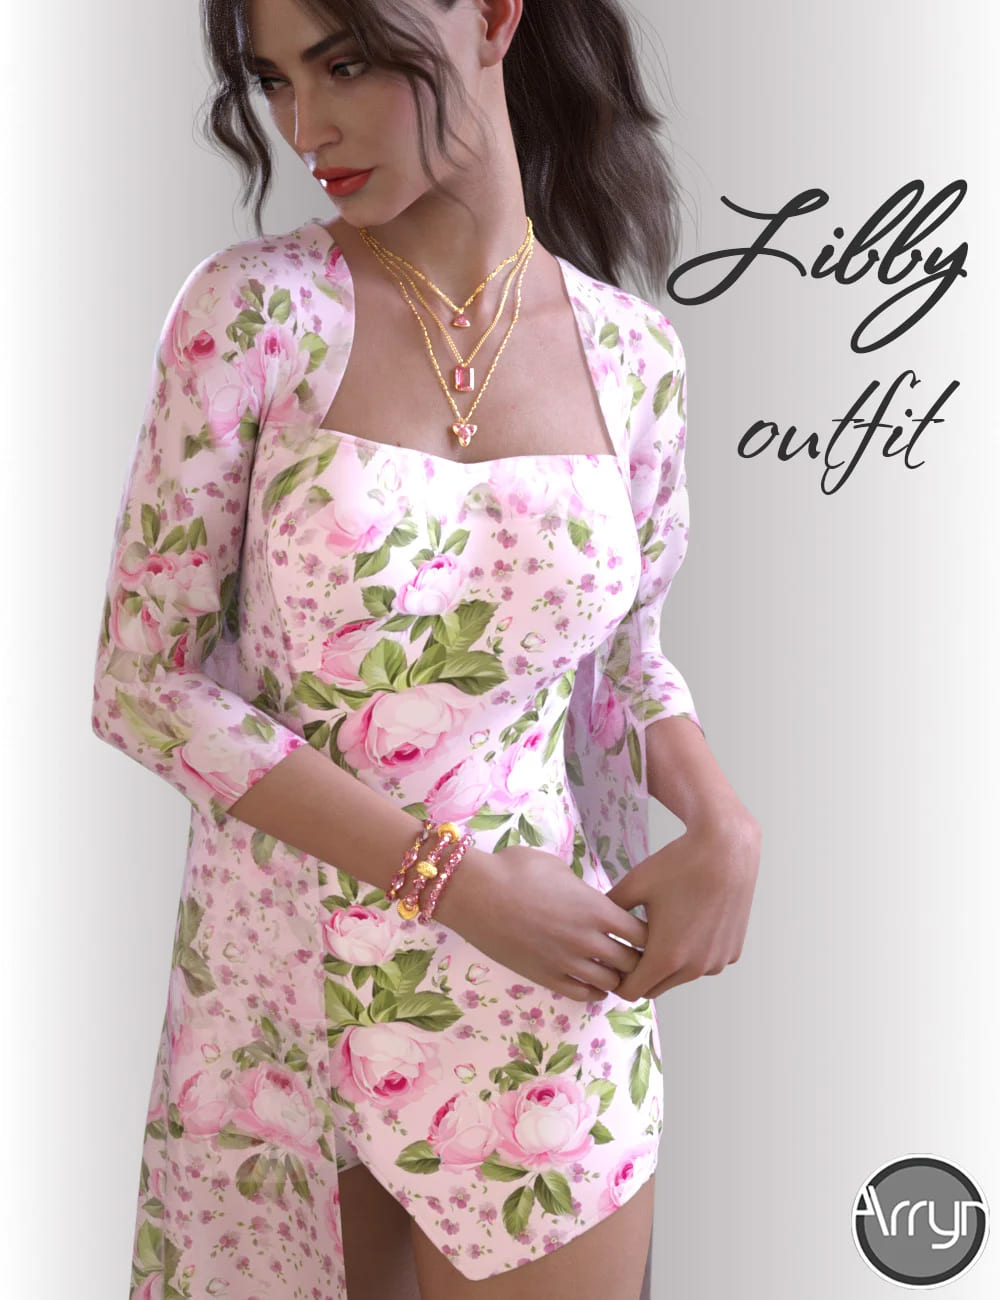 dForce Libby Holiday Outfit for Genesis 8 Females_DAZ3DDL